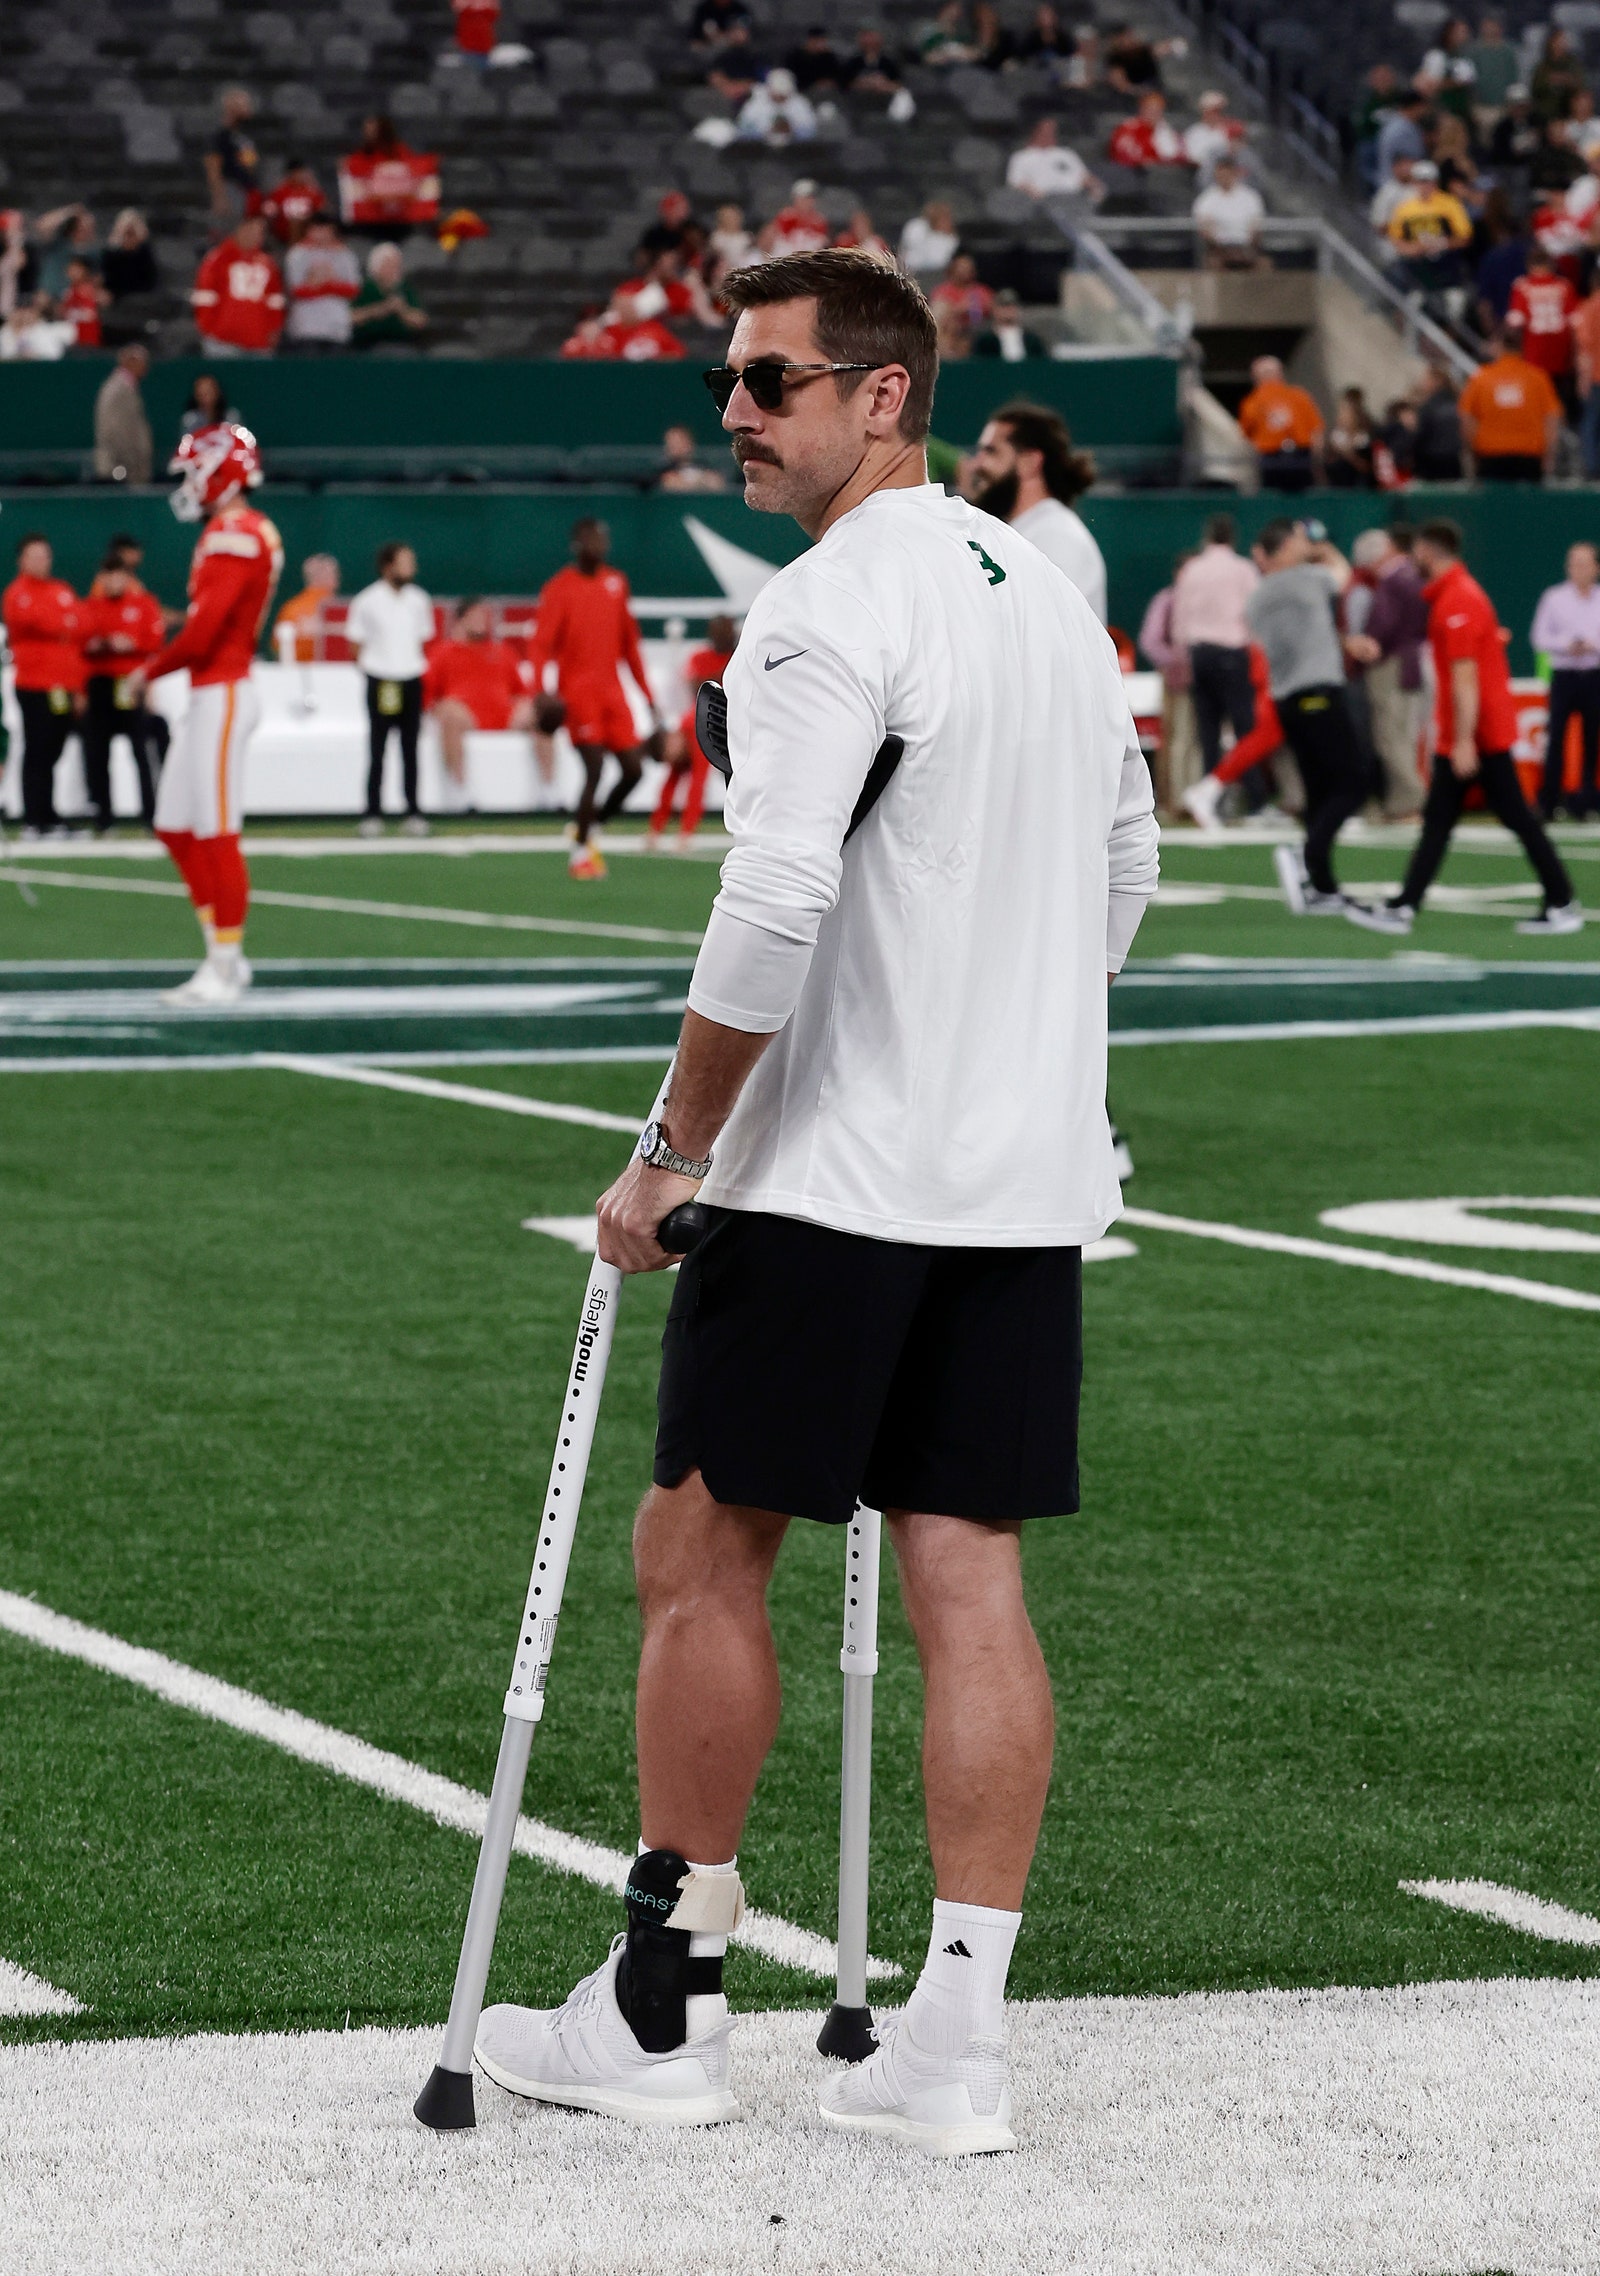 Rodgers is currently unable to play after injuring his Achilles.